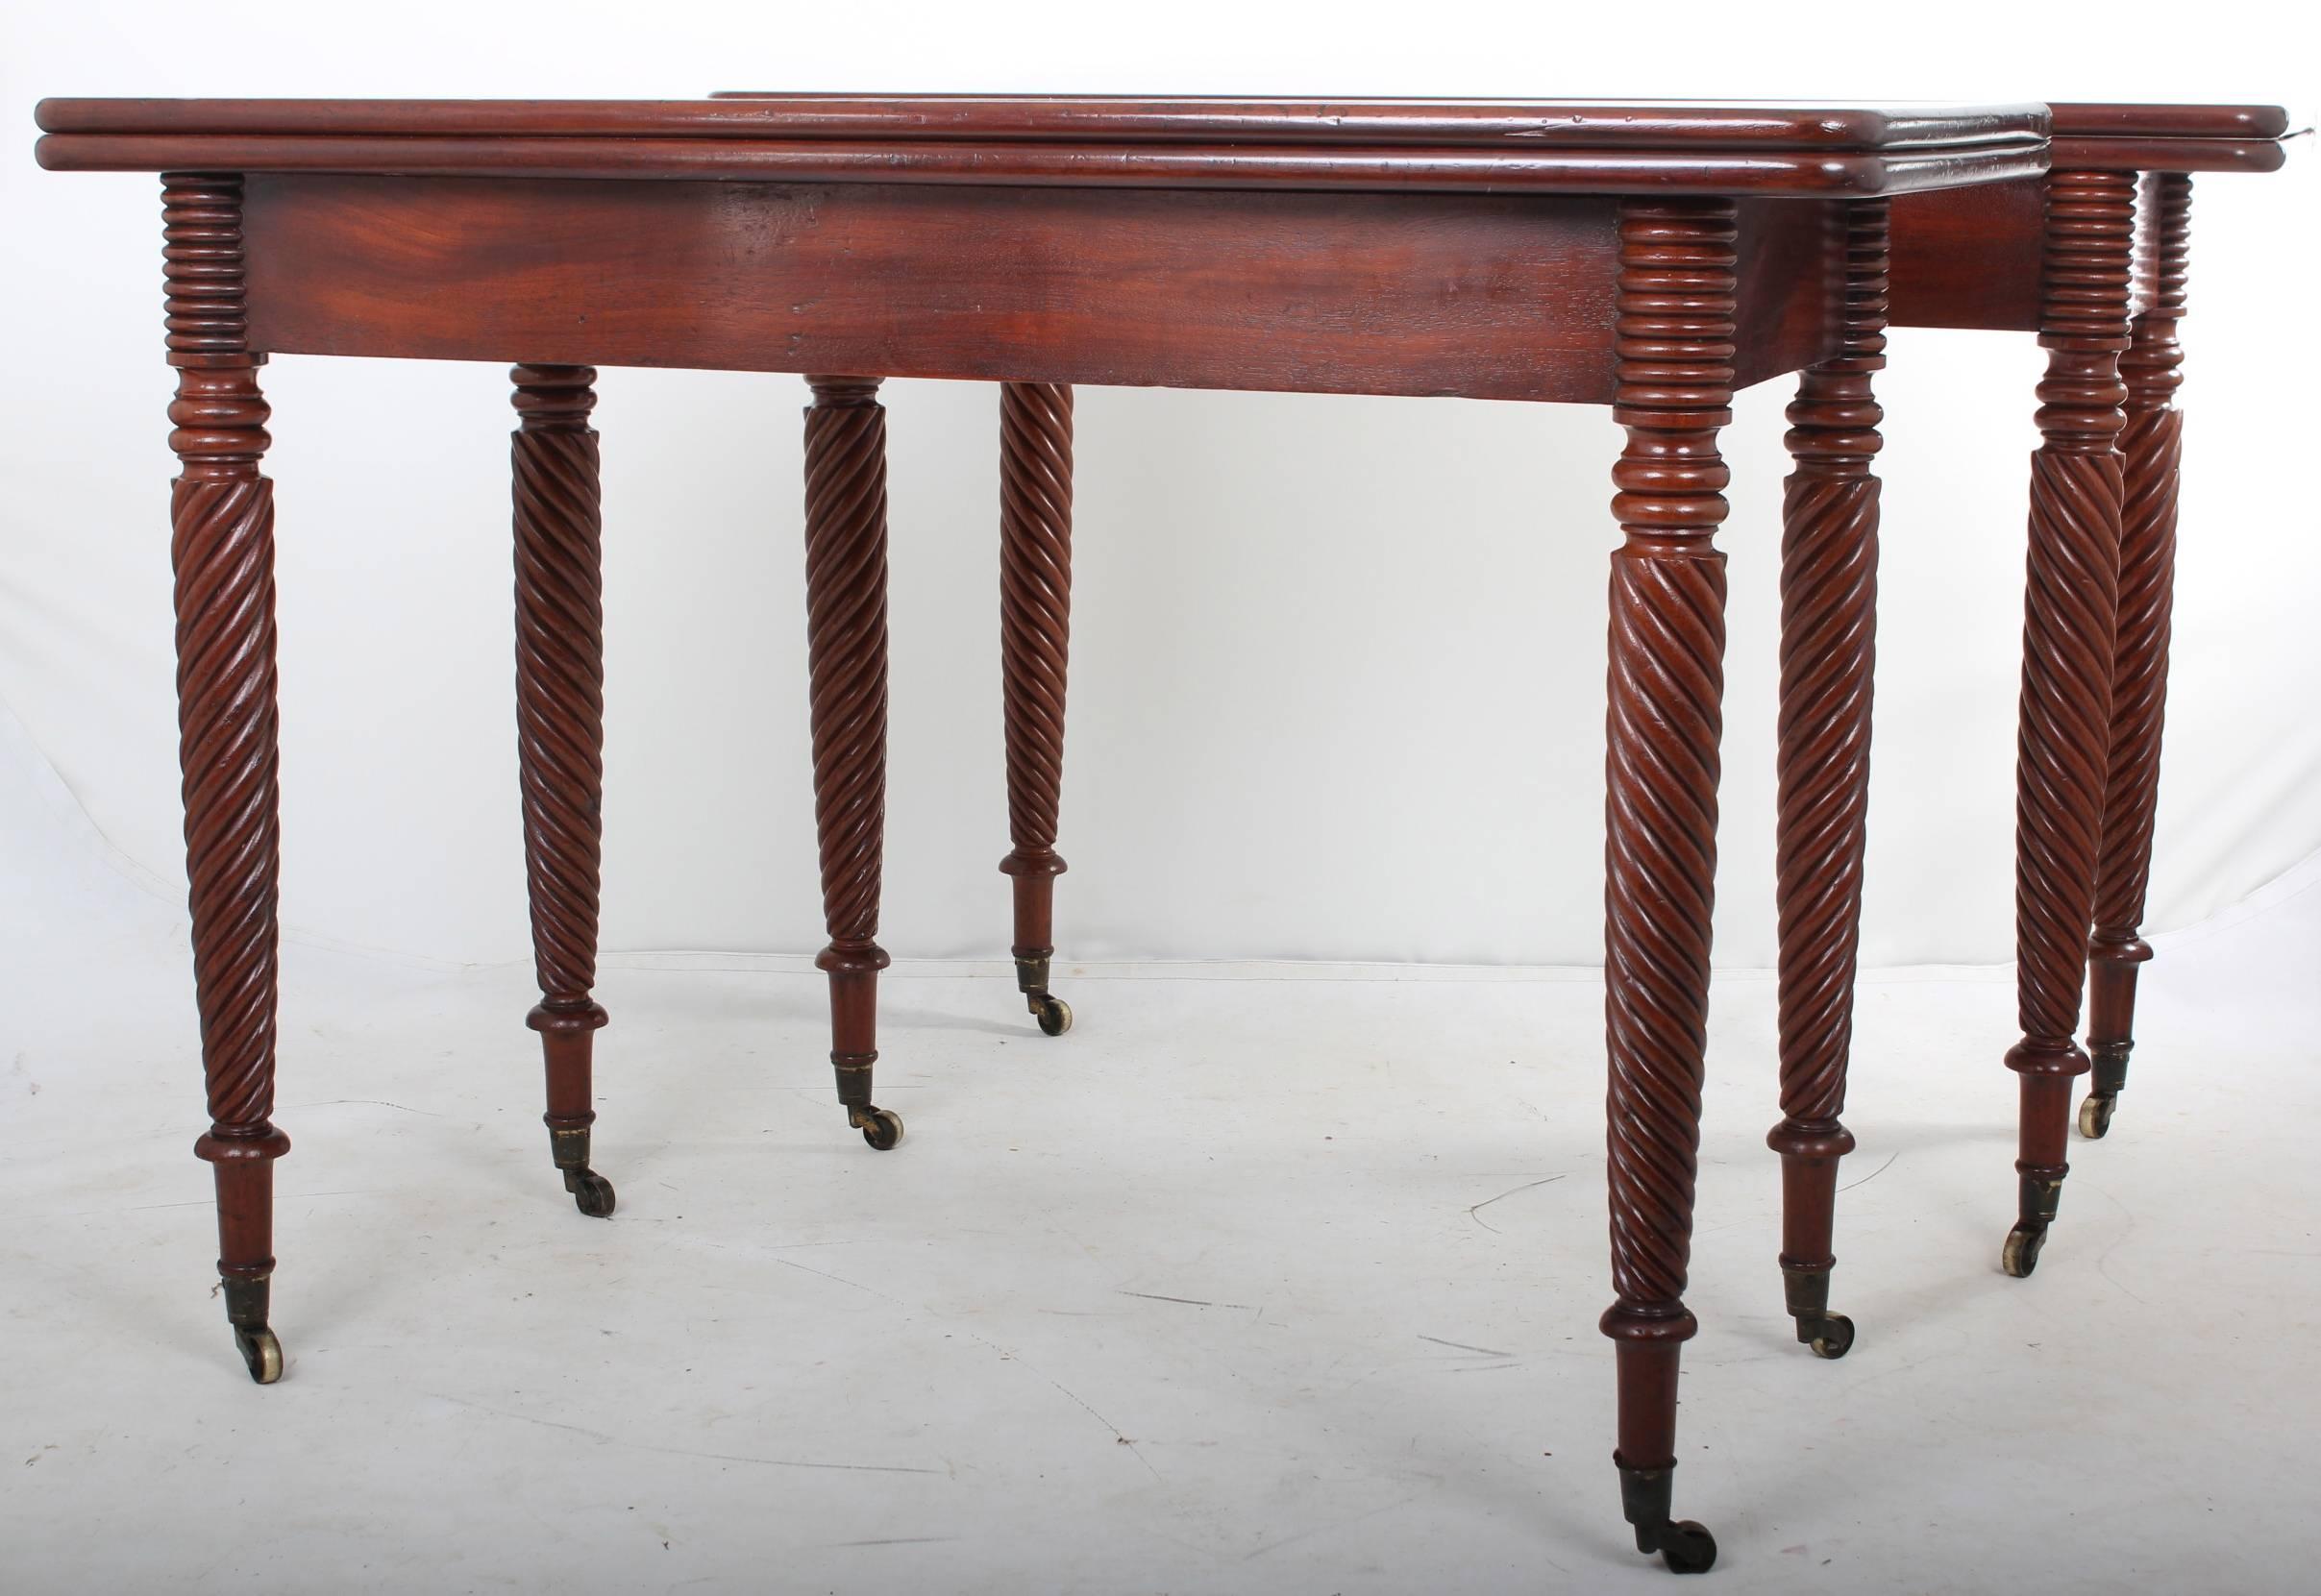 English, late Georgian, circa 1800 Made from the best Cuban mahogany and in showroom condition.
Swivel and fold over top over spiral twist legs, standing on brass cap castors.
A very good rich georgian color.


W 97cm/42